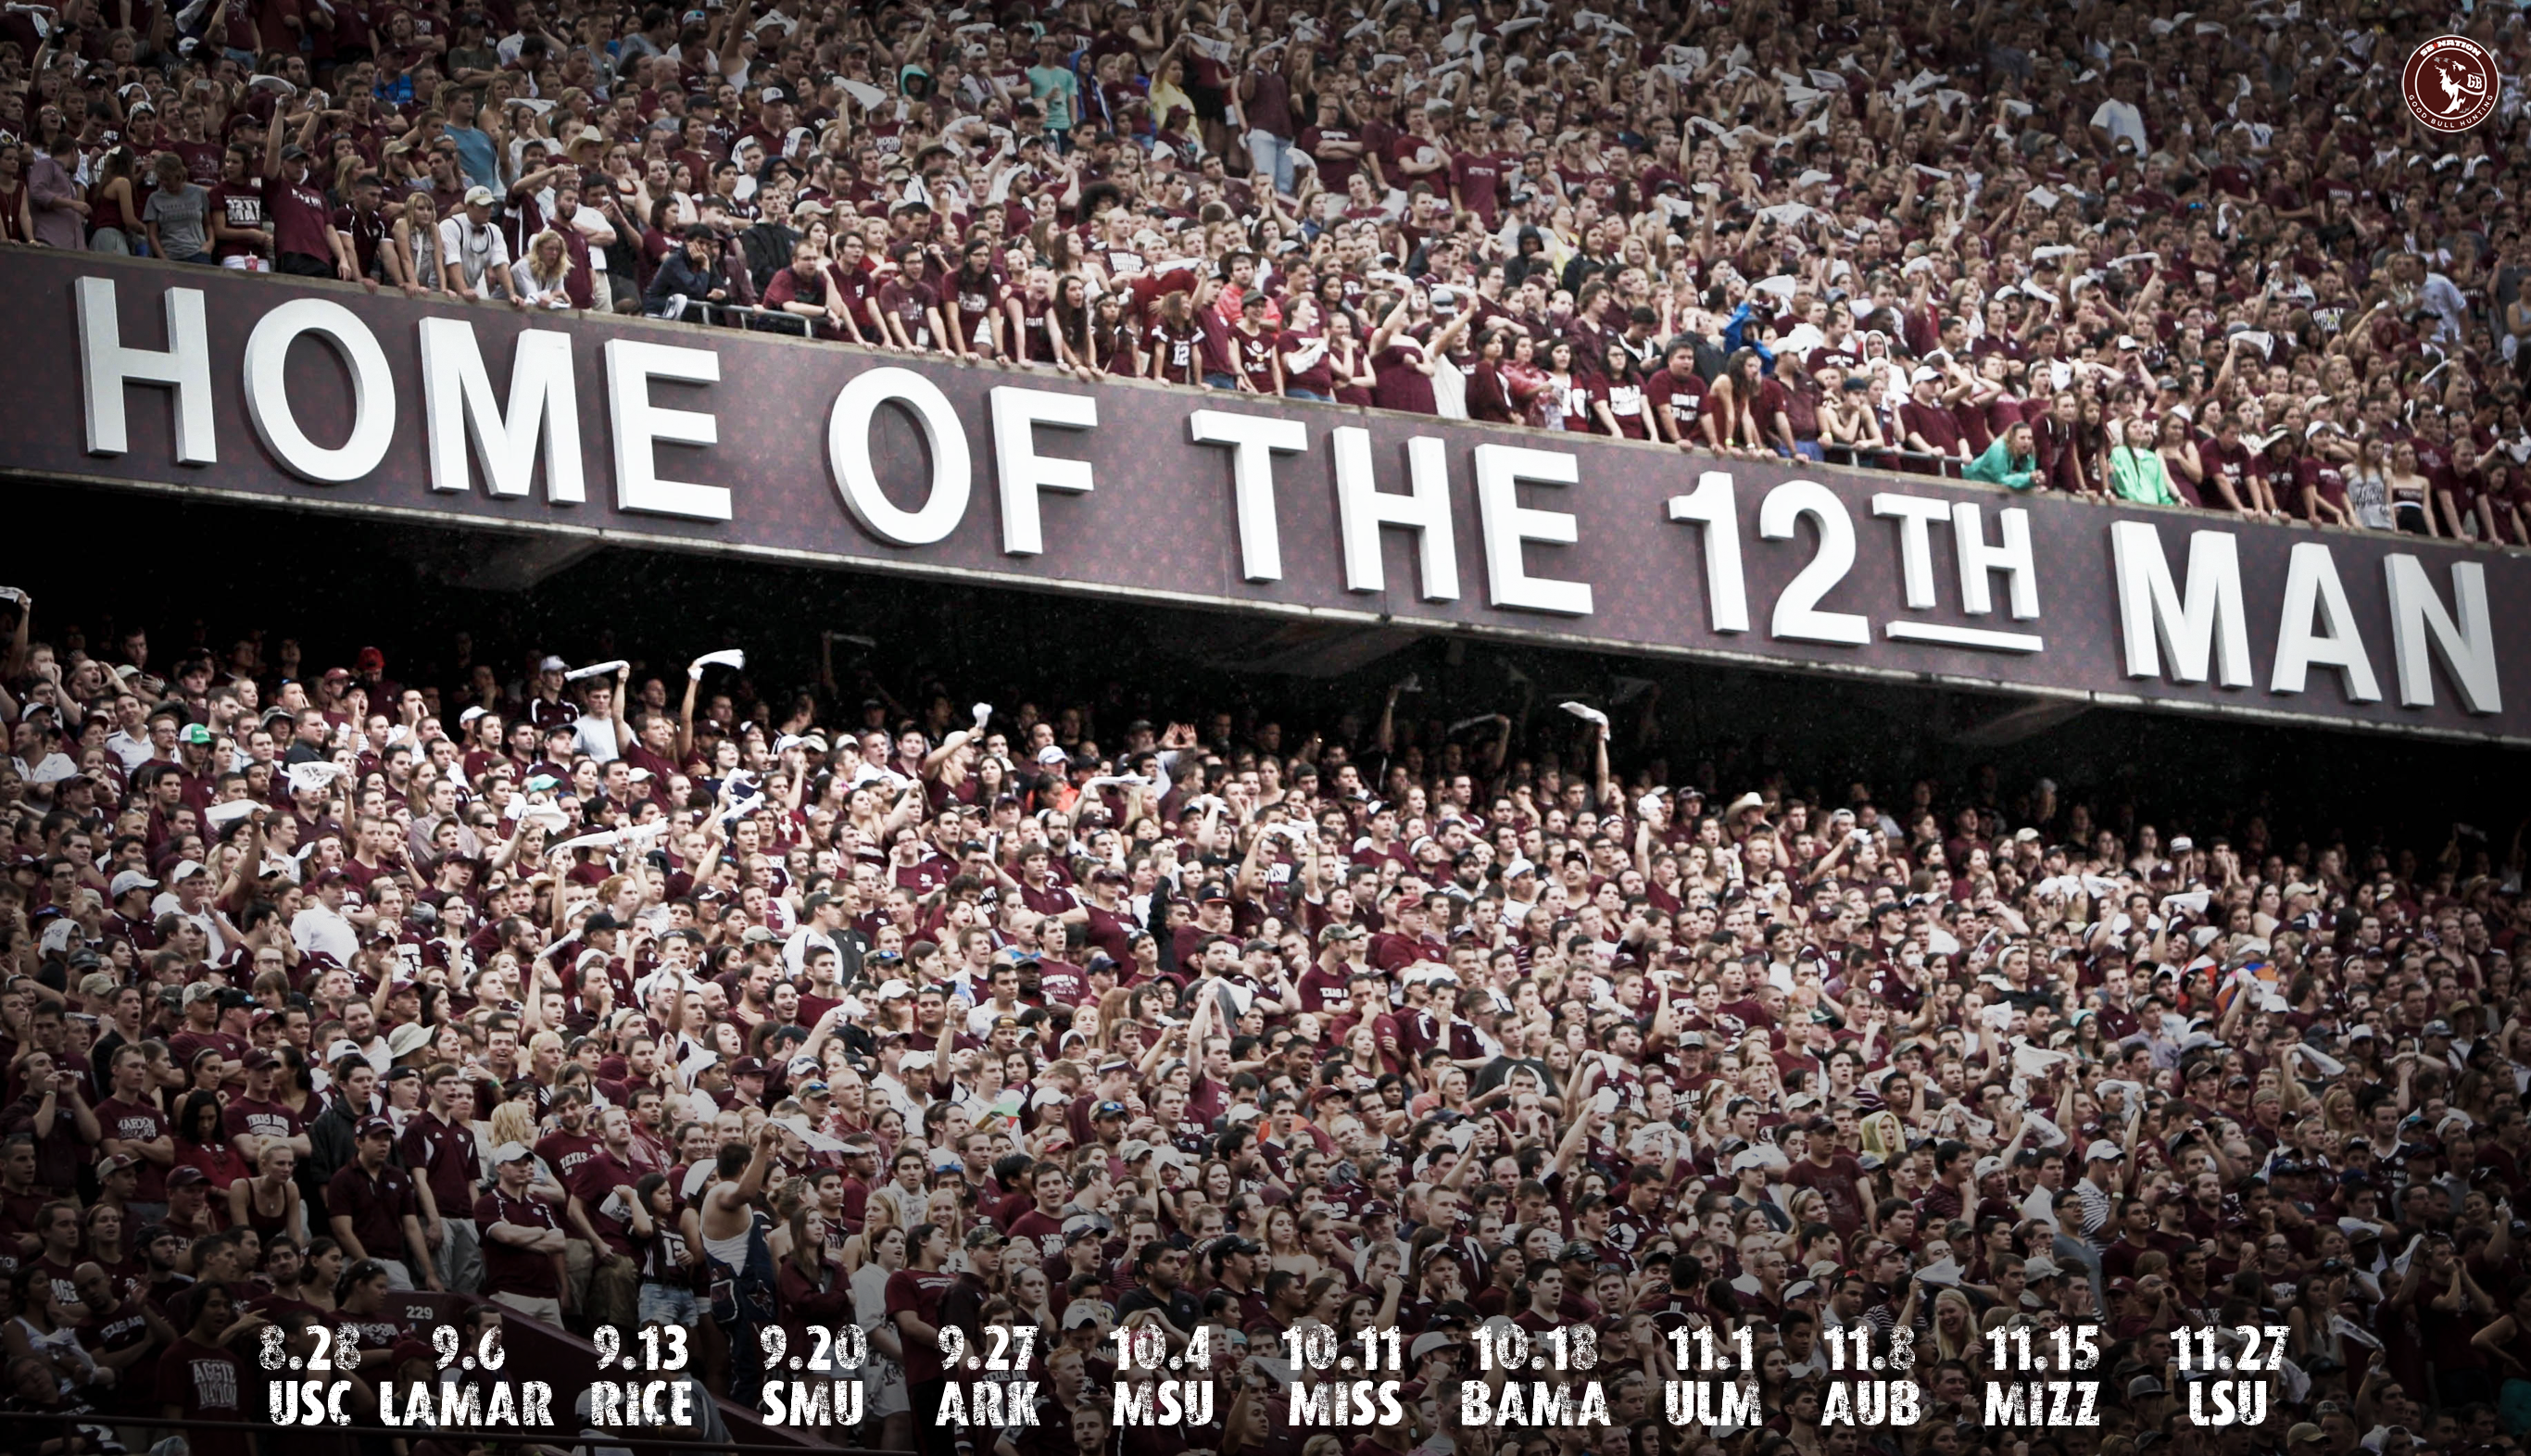 Aggie Football Wallpapers Round 2 - Good Bull Hunting